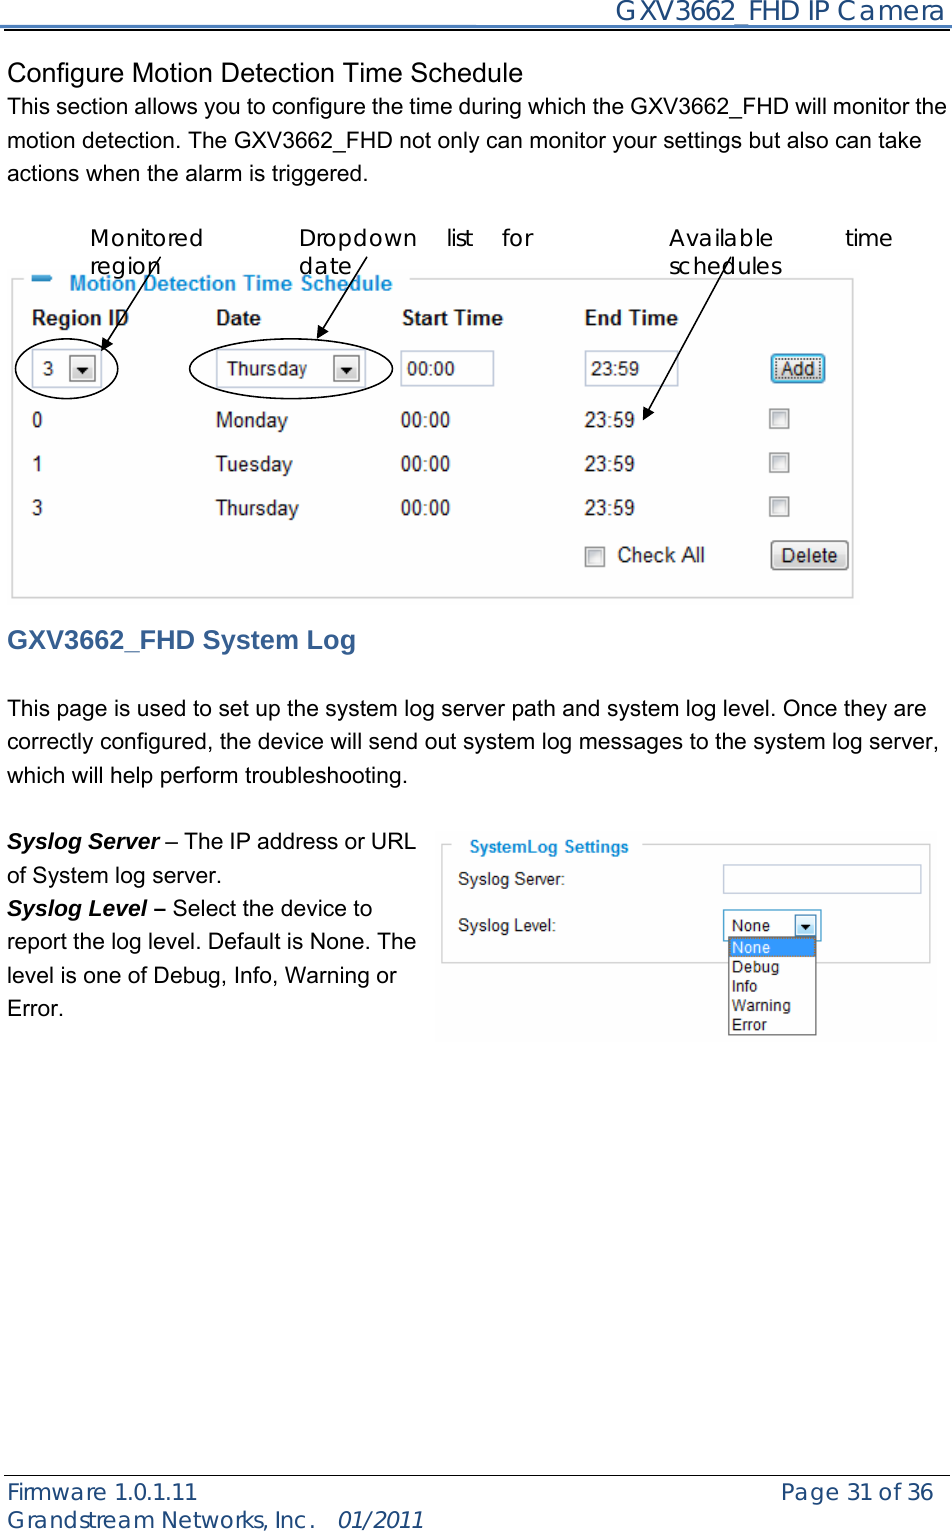     GXV3662_FHD IP Camera Firmware 1.0.1.11                                                   Page 31 of 36     Grandstream Networks, Inc.  01/2011  Configure Motion Detection Time Schedule   This section allows you to configure the time during which the GXV3662_FHD will monitor the motion detection. The GXV3662_FHD not only can monitor your settings but also can take actions when the alarm is triggered.                GXV3662_FHD System Log  This page is used to set up the system log server path and system log level. Once they are correctly configured, the device will send out system log messages to the system log server, which will help perform troubleshooting.  Syslog Server – The IP address or URL of System log server. Syslog Level – Select the device to report the log level. Default is None. The level is one of Debug, Info, Warning or Error.               Dropdown list for date Available time schedules Monitored region 